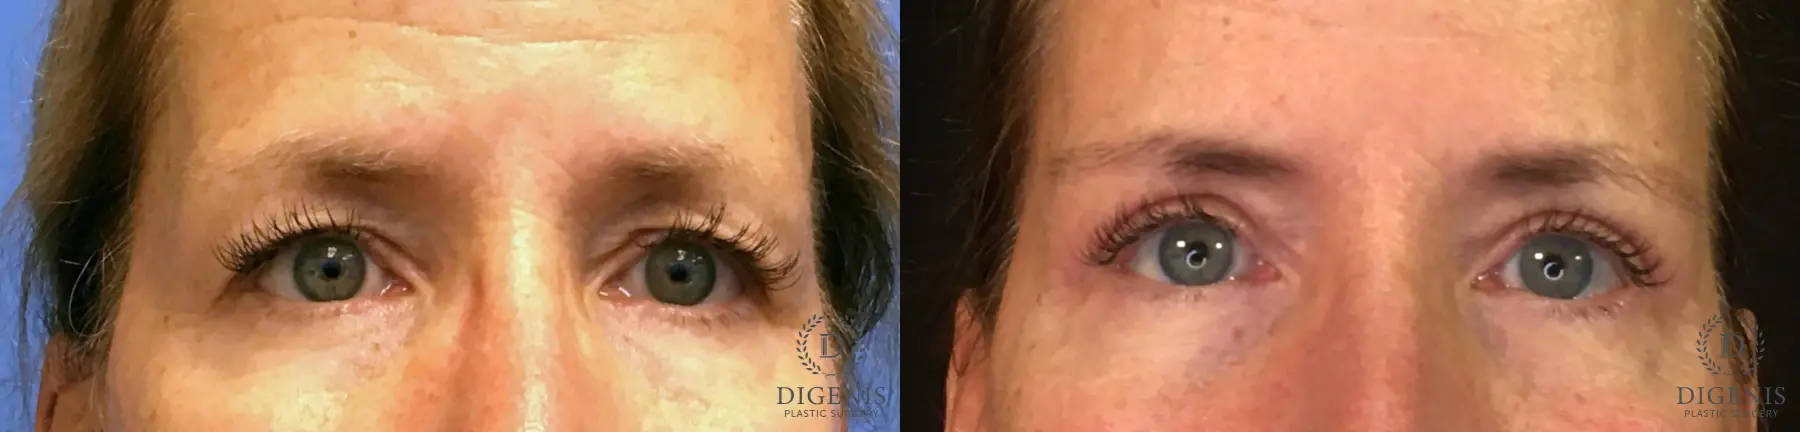 Eyelid Surgery: Patient 2 - Before and After  